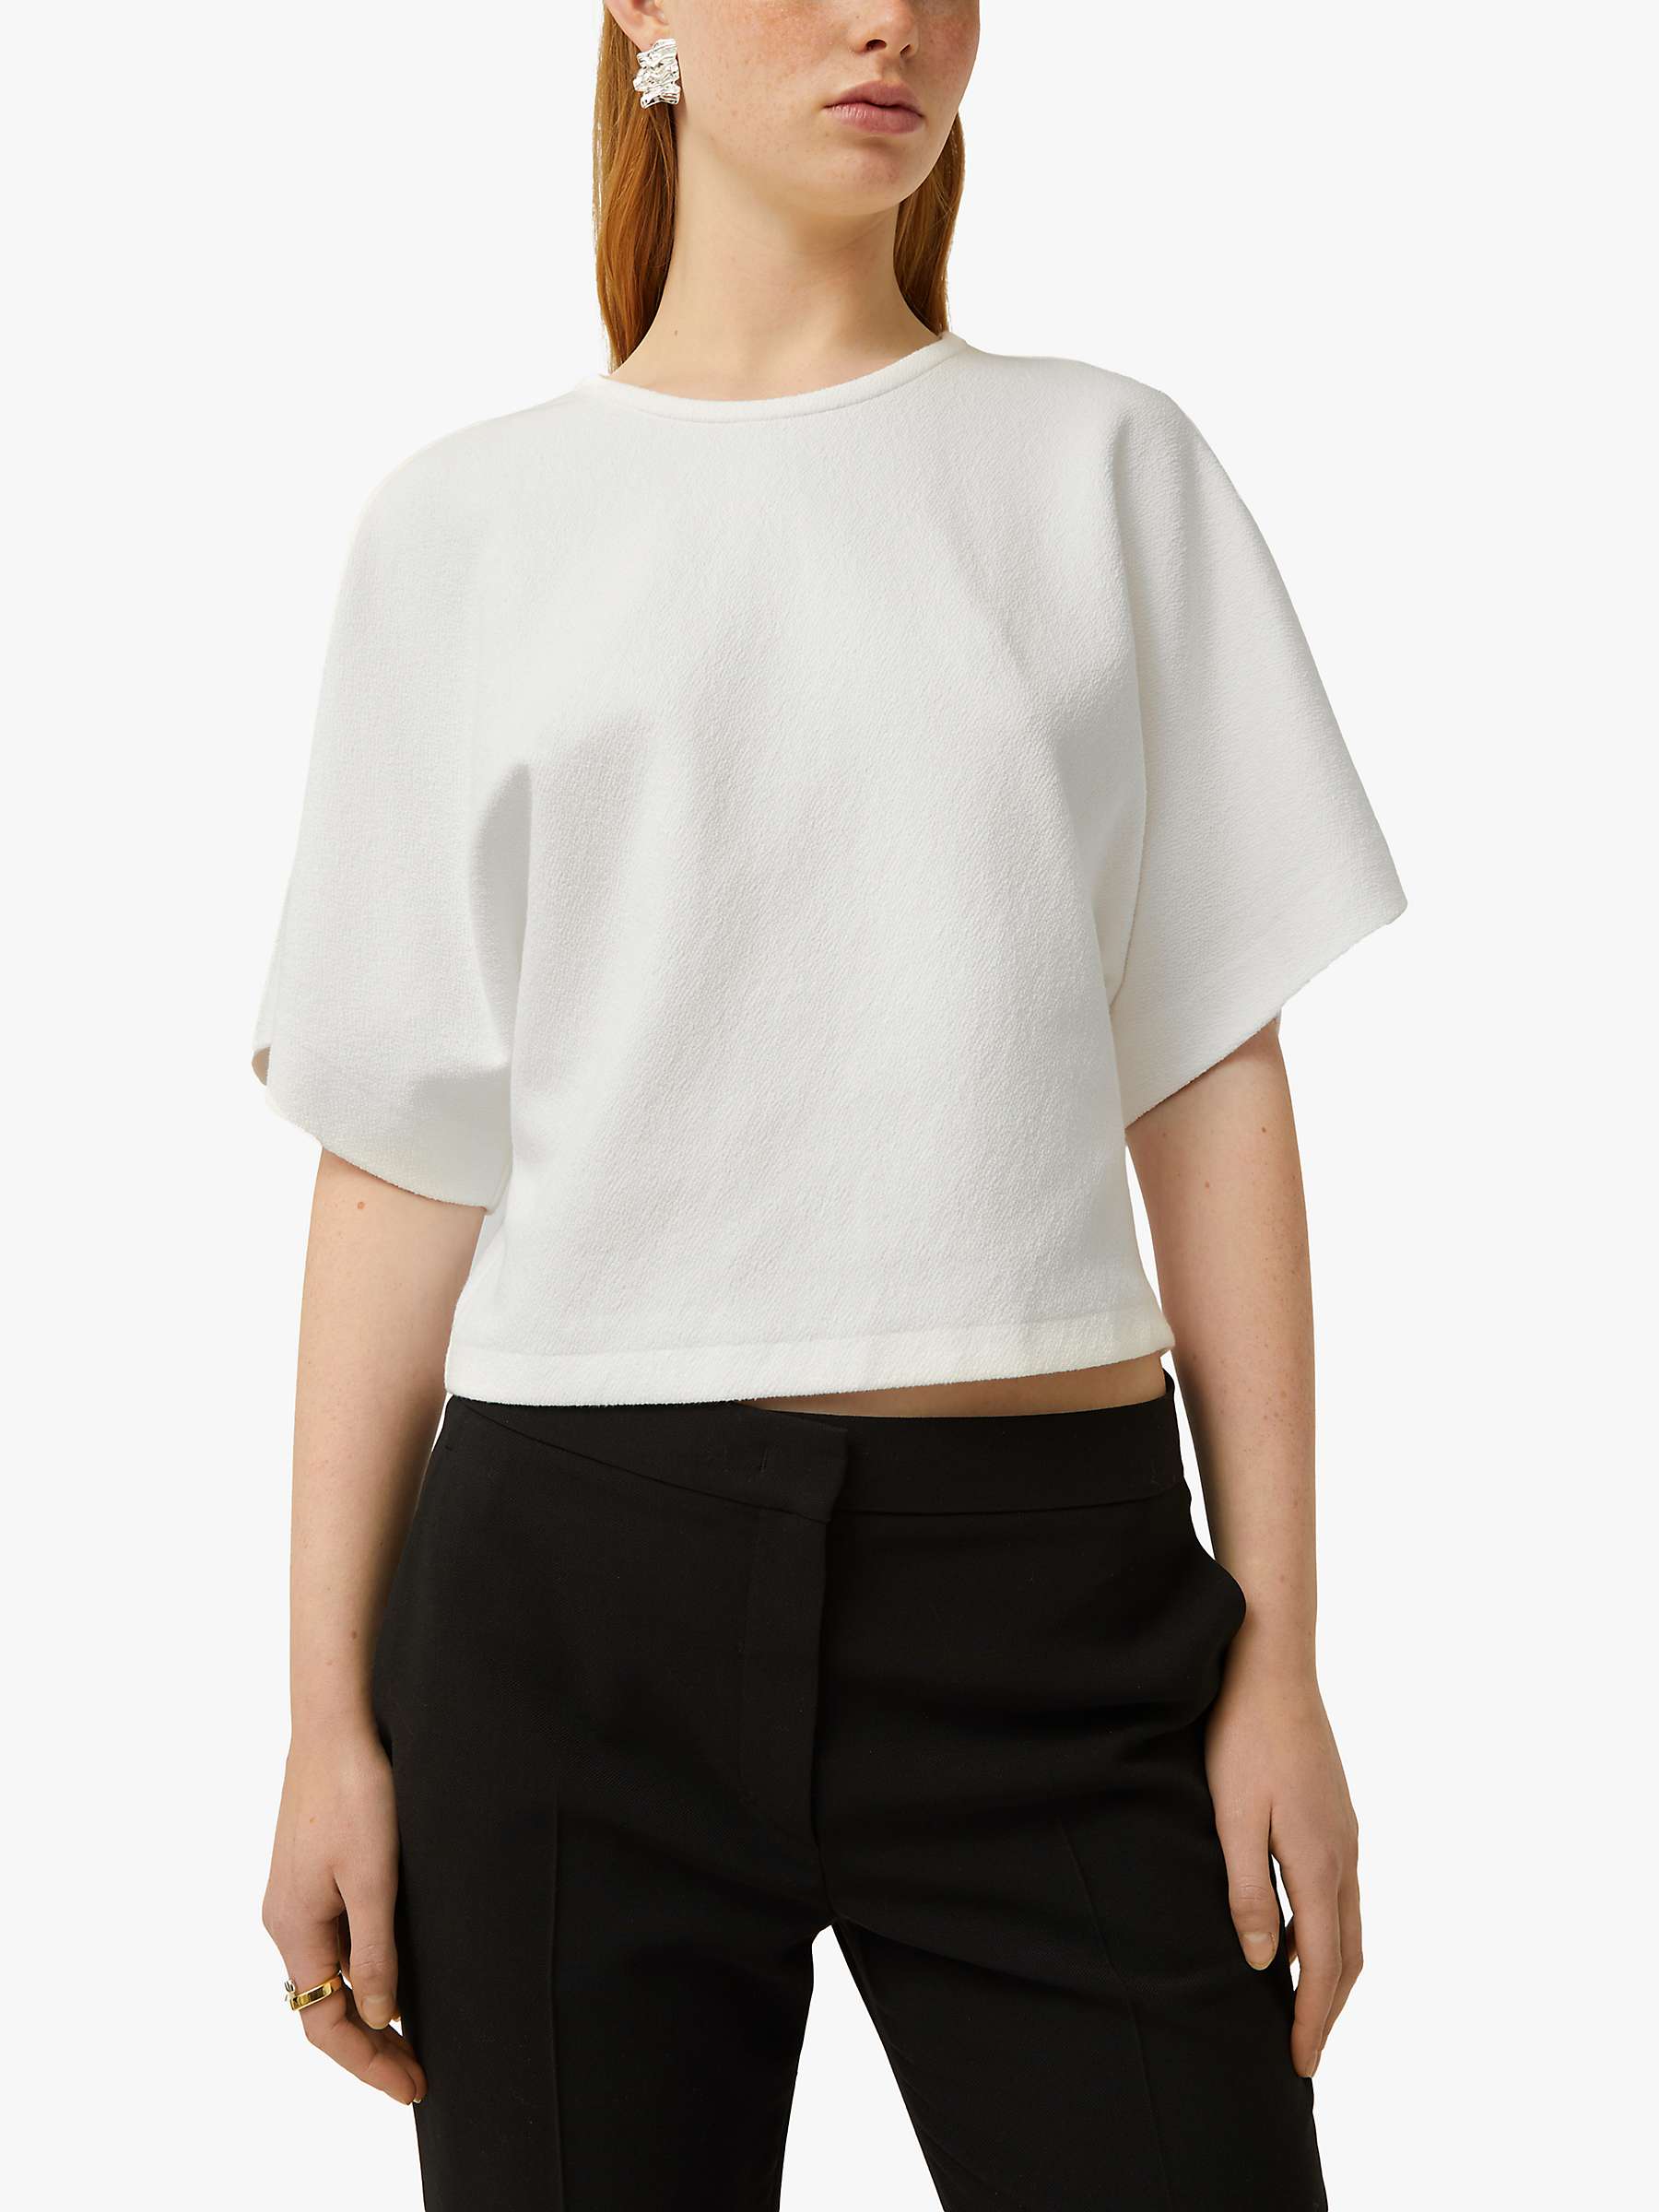 Buy Jigsaw Textured Jersey Top, White Online at johnlewis.com